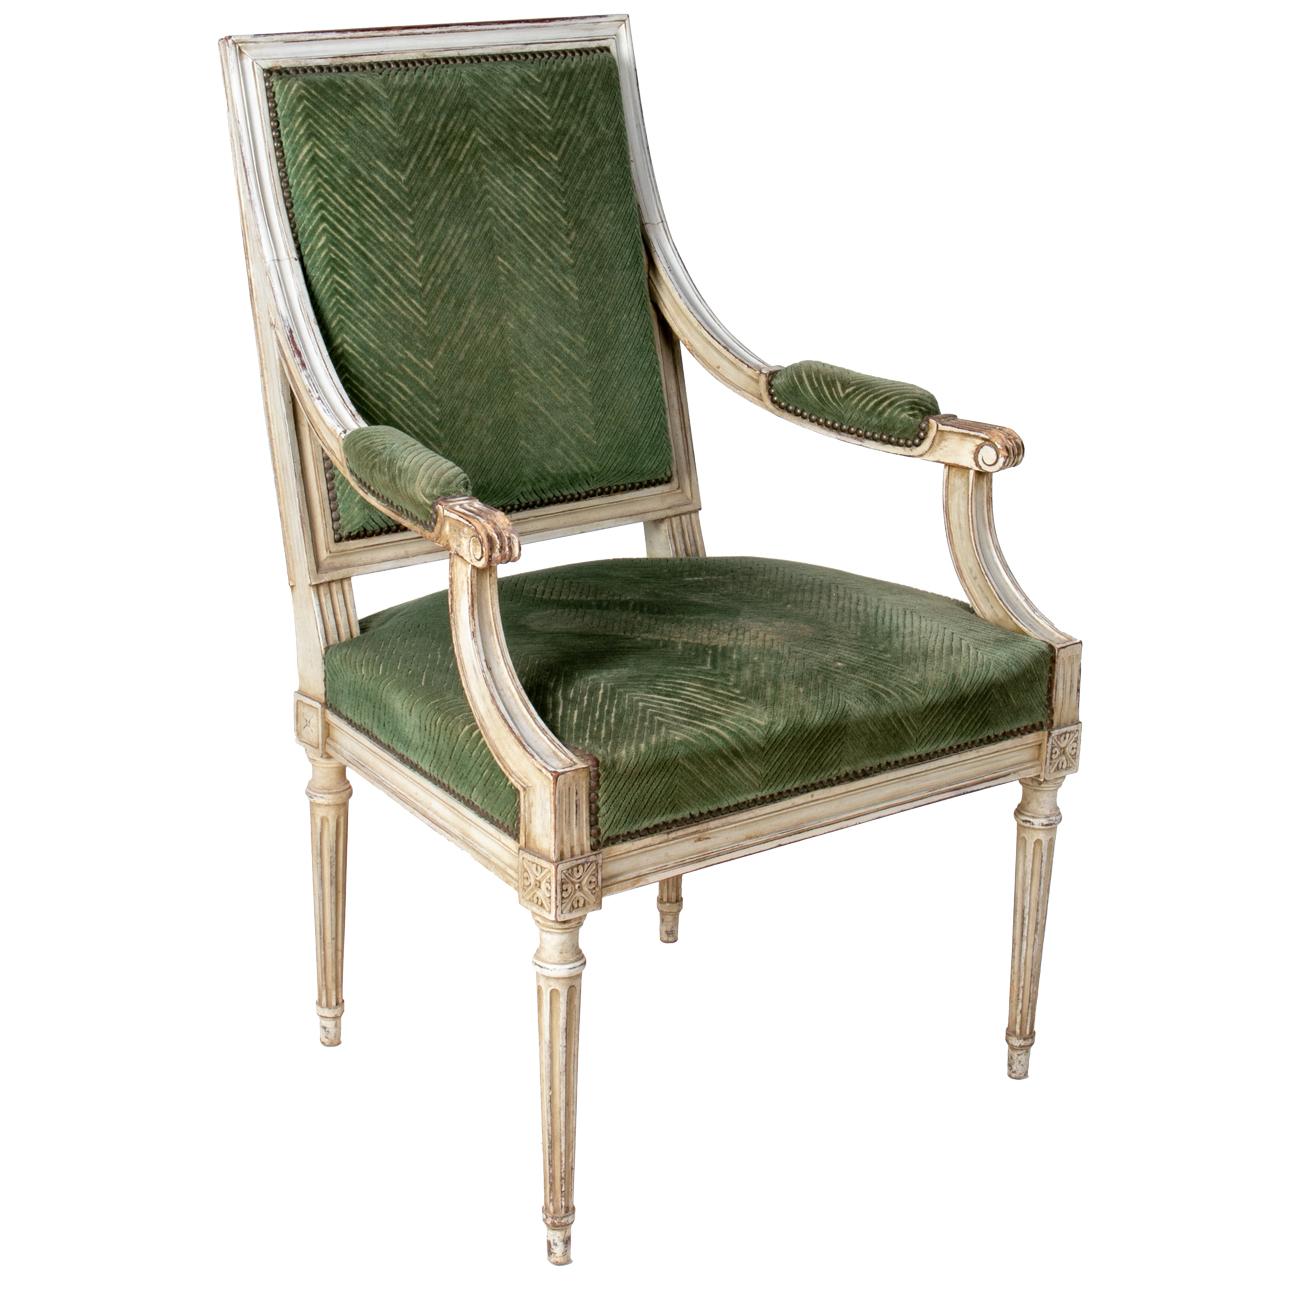 1870s French Louis XVI Style White Lacquered and Velvet Upholstered Armchair For Sale